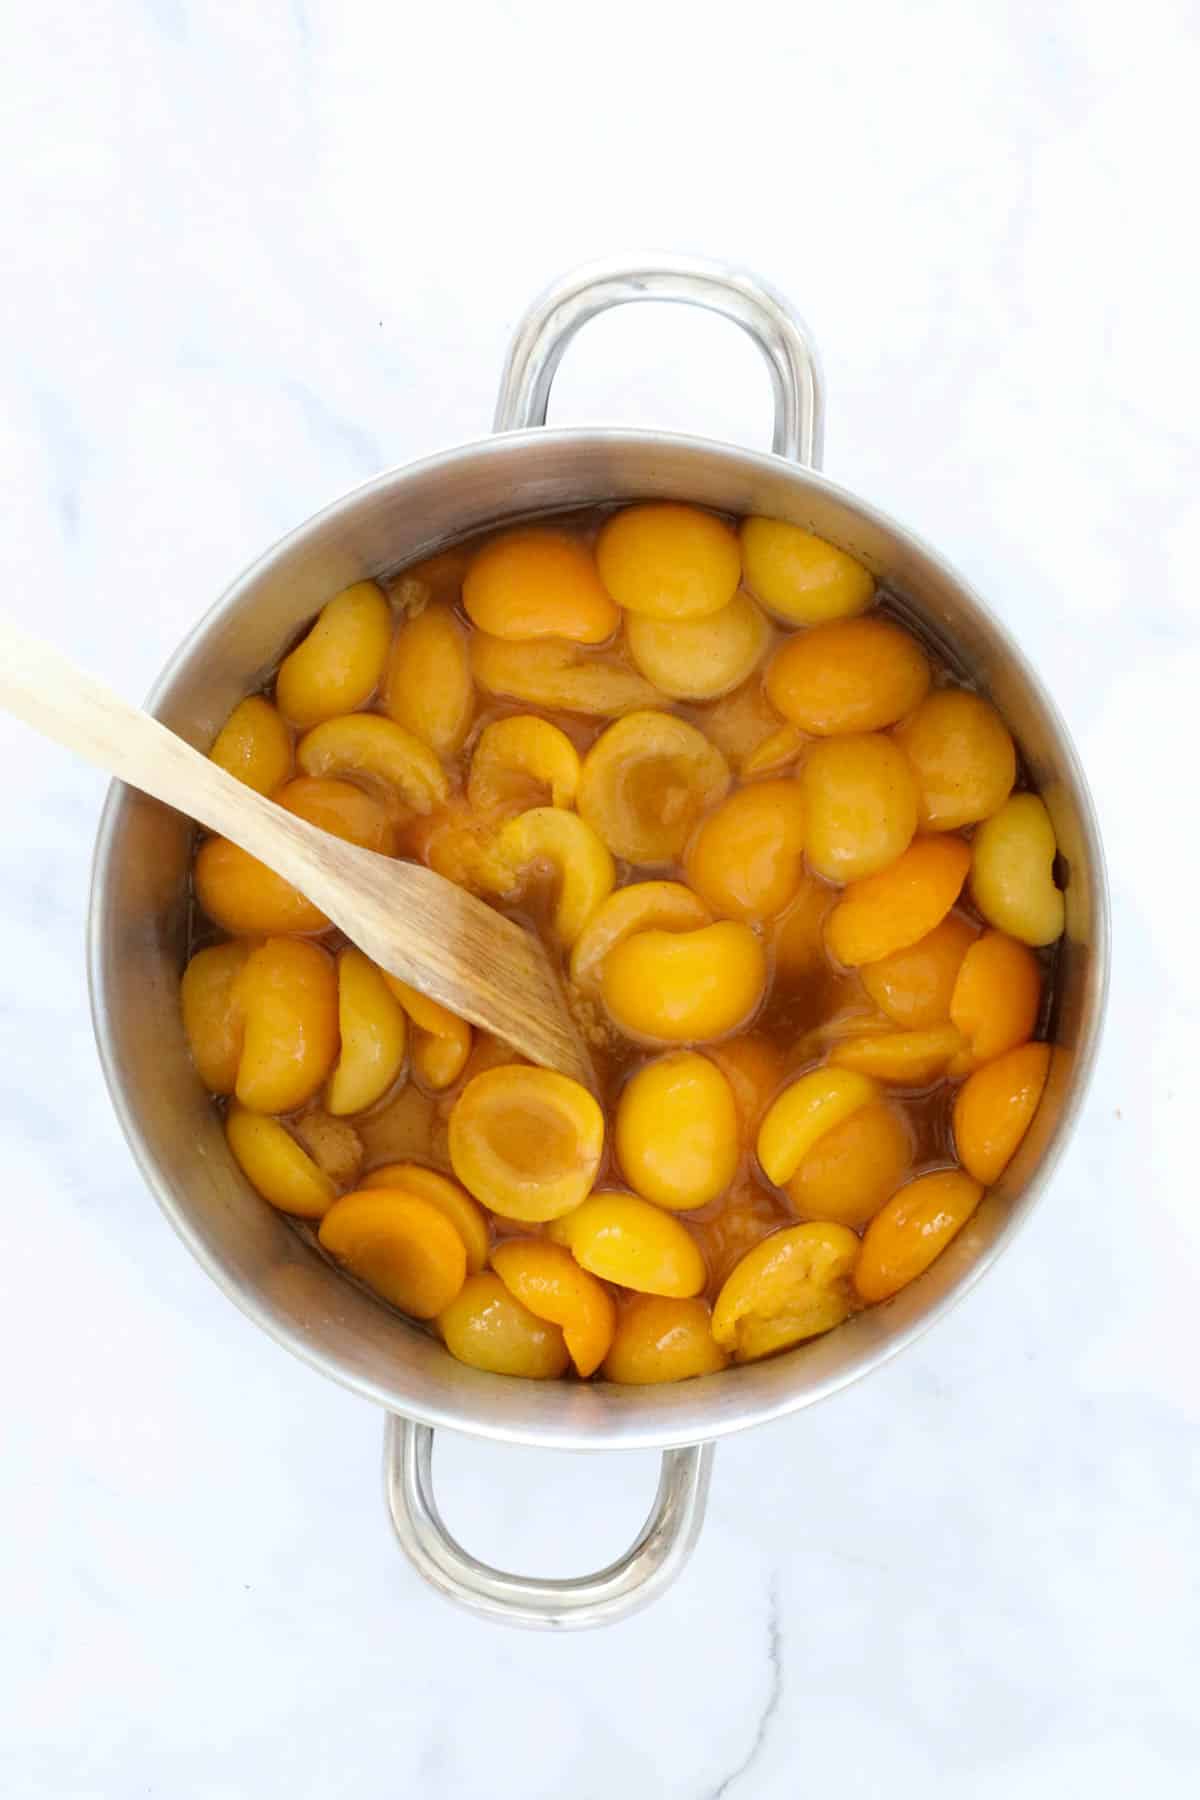 Tinned apricot halves added to the sugar syrup in a saucepan.